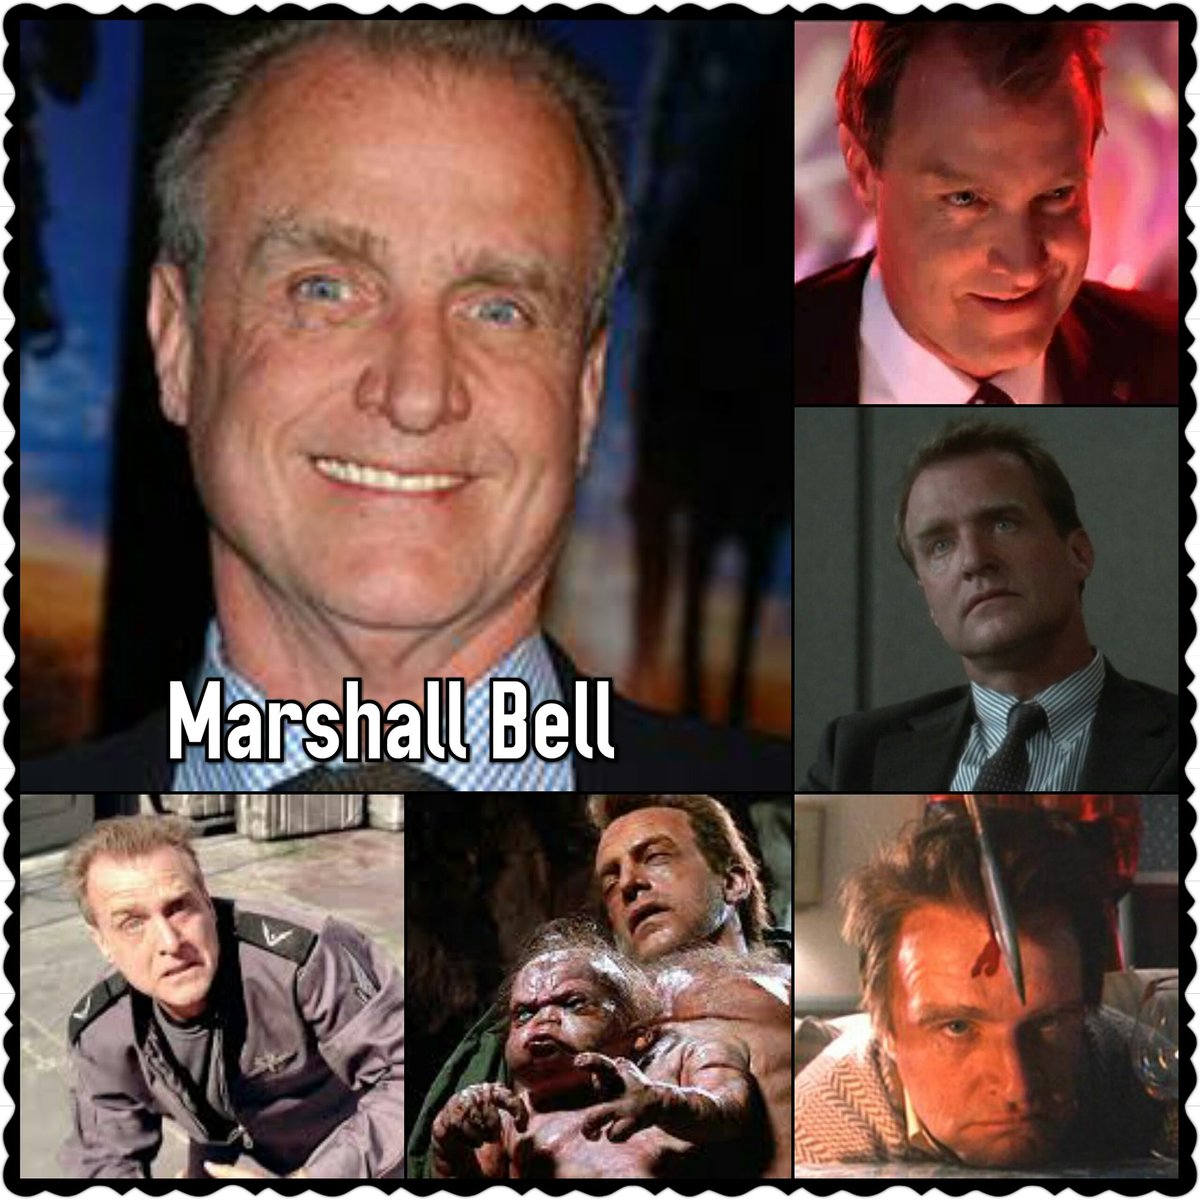 Our special interview with actor Marshall Bell @TheMarshallBell is up at EILFM.podbean.com! What's your favorite role or movie of his?!? #marshallbell #castaways #totalrecall #talesfromthecrypt #Cherry2000 #twins #starshiptroopers #PodernFamily #moviepodsquad